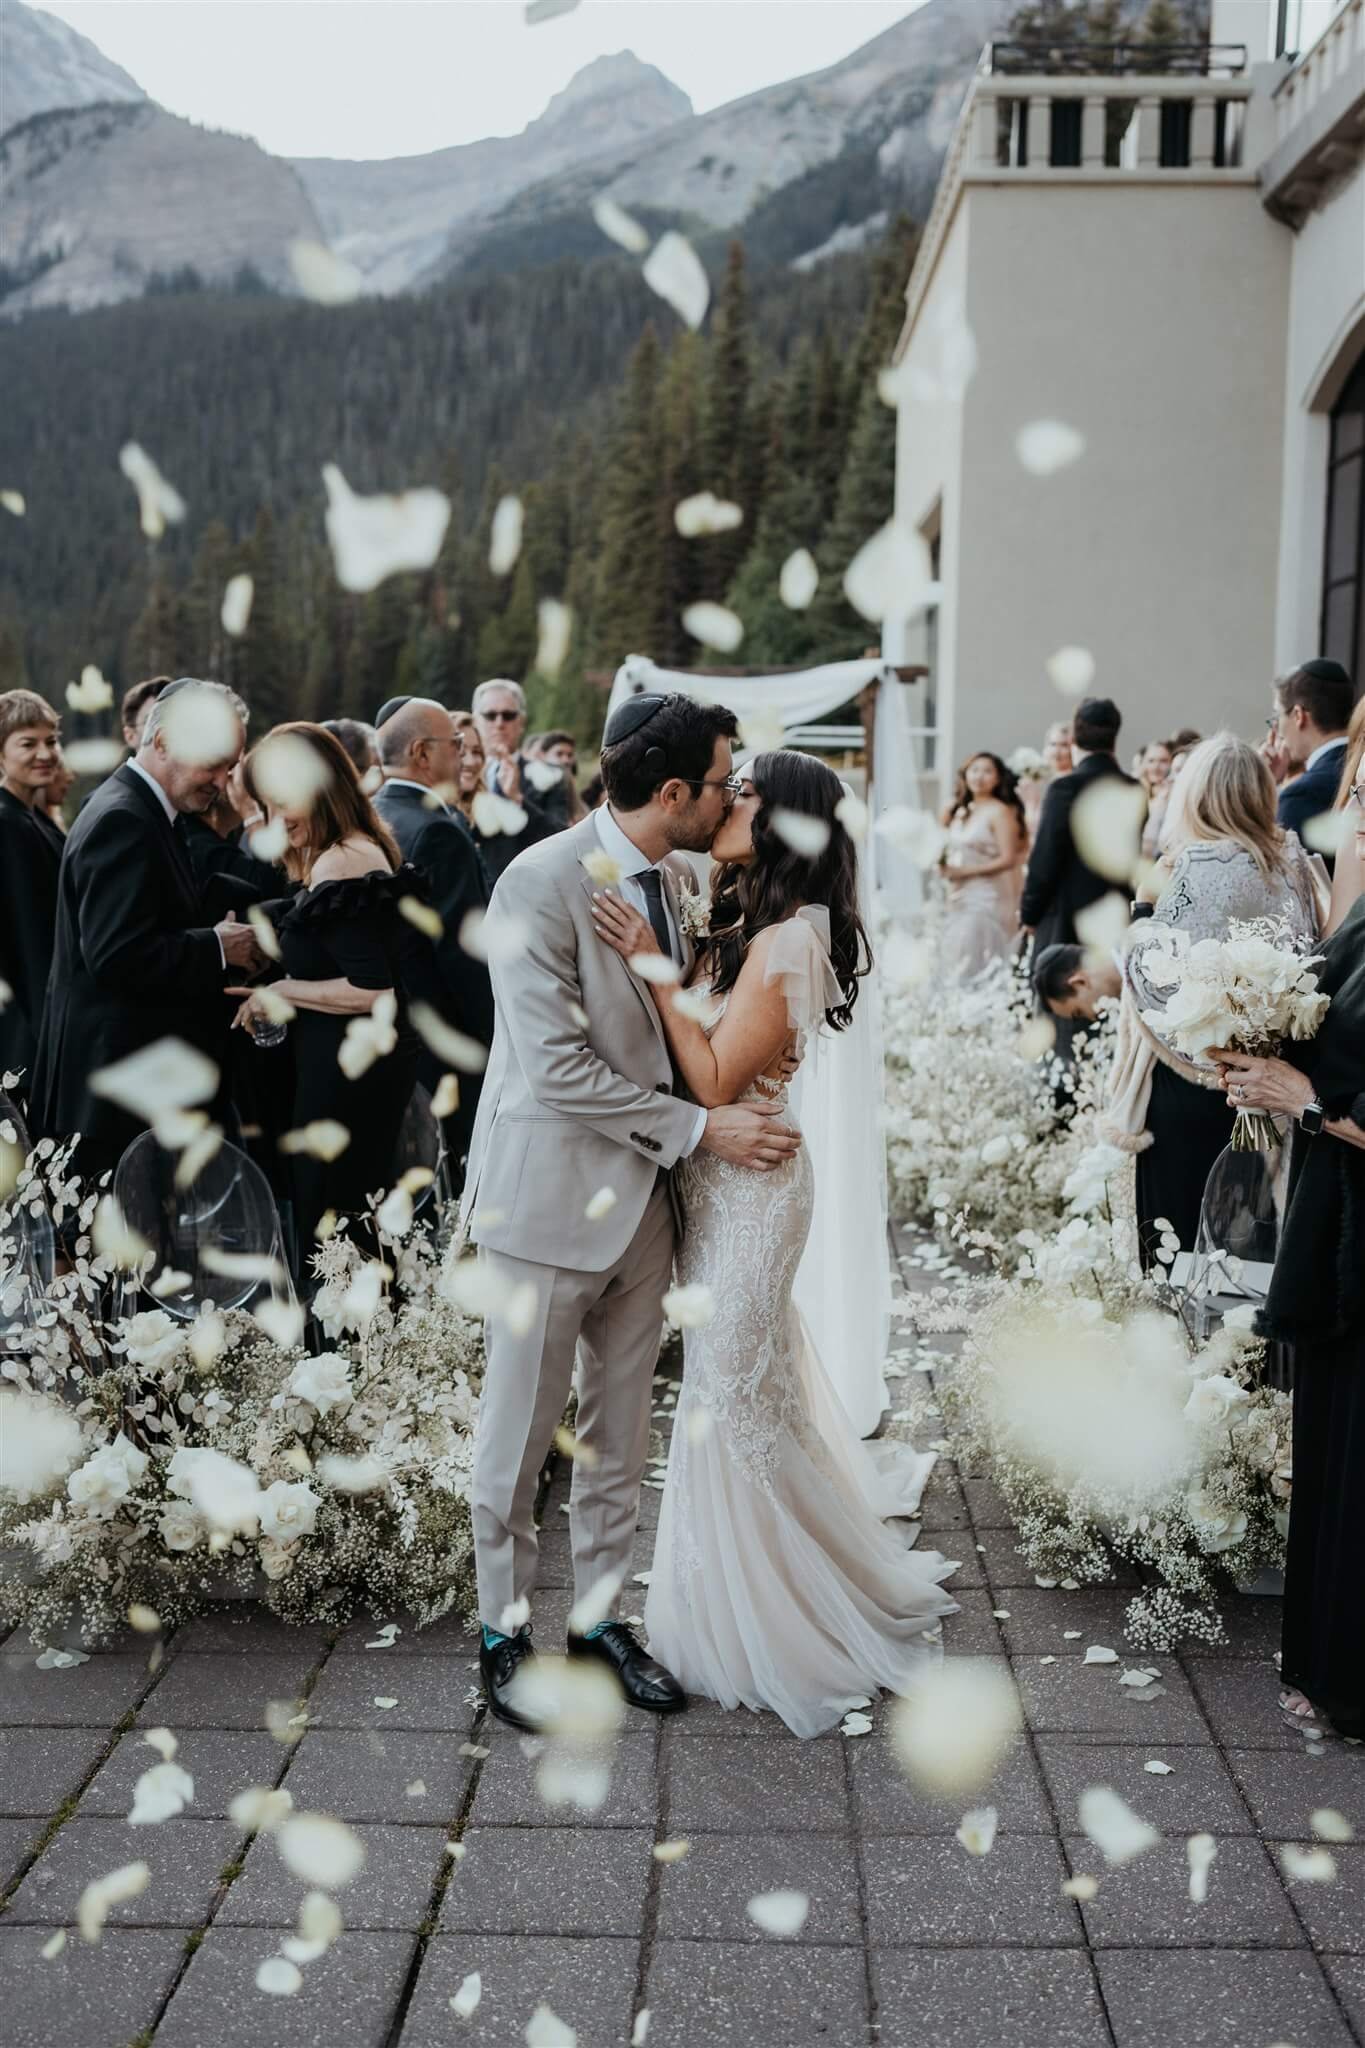 Bride and groom kiss after outdoor wedding ceremony by Lake Louise